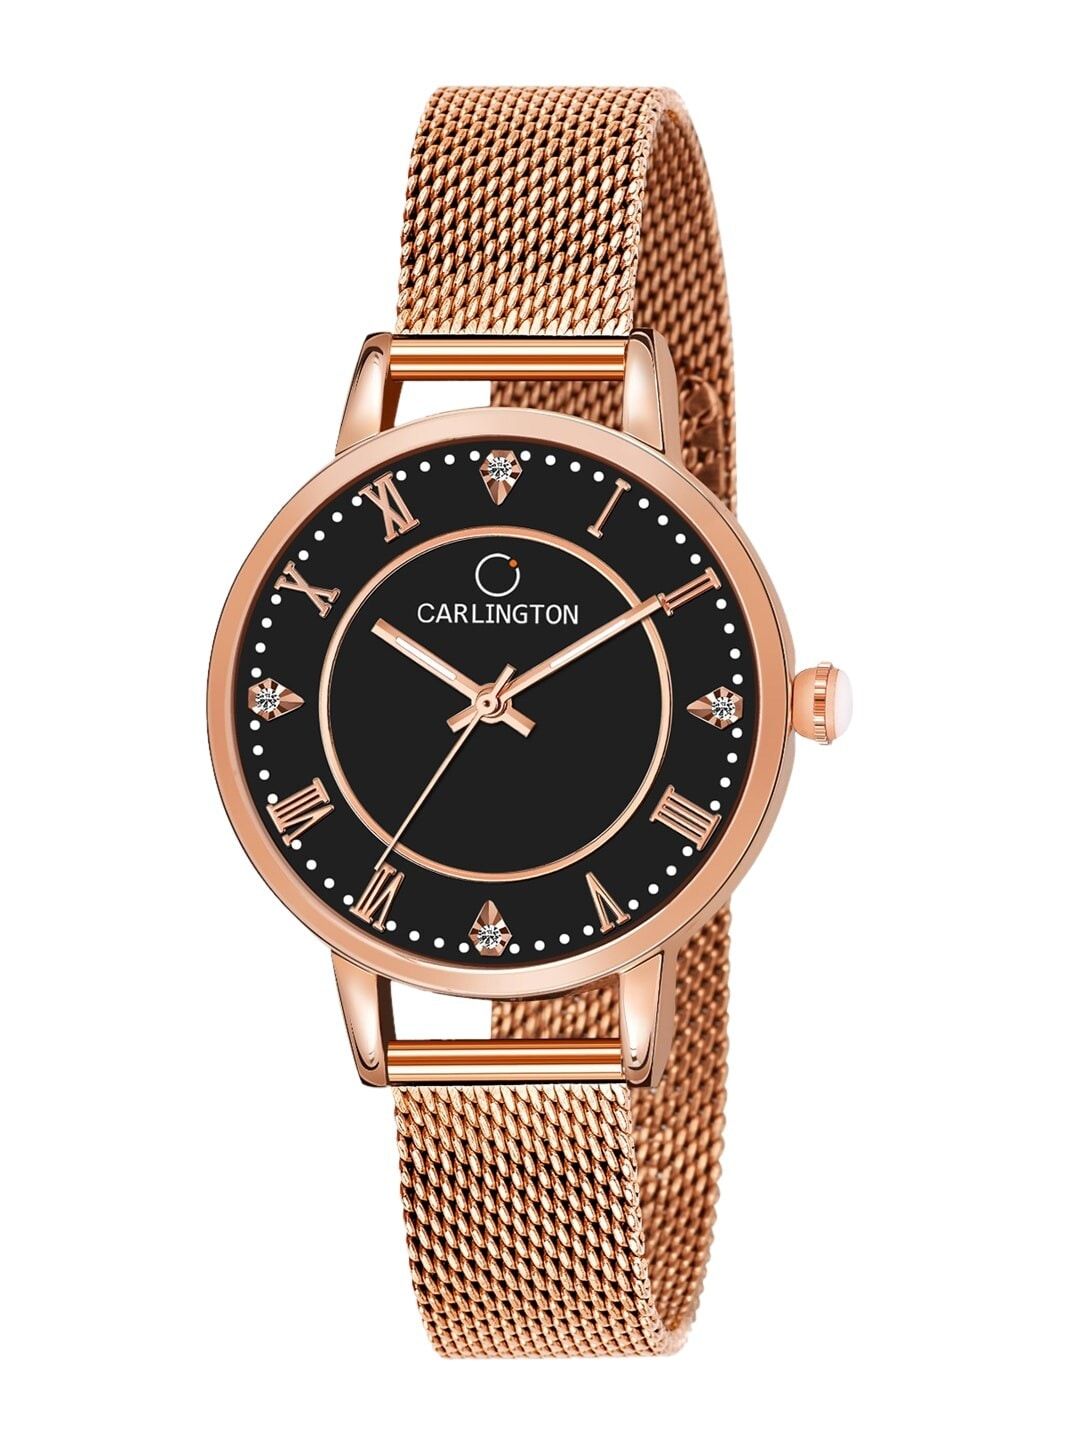 CARLINGTON Rose Gold Toned Bracelet Style Straps Analogue Watch Carlington CT2013 Price in India